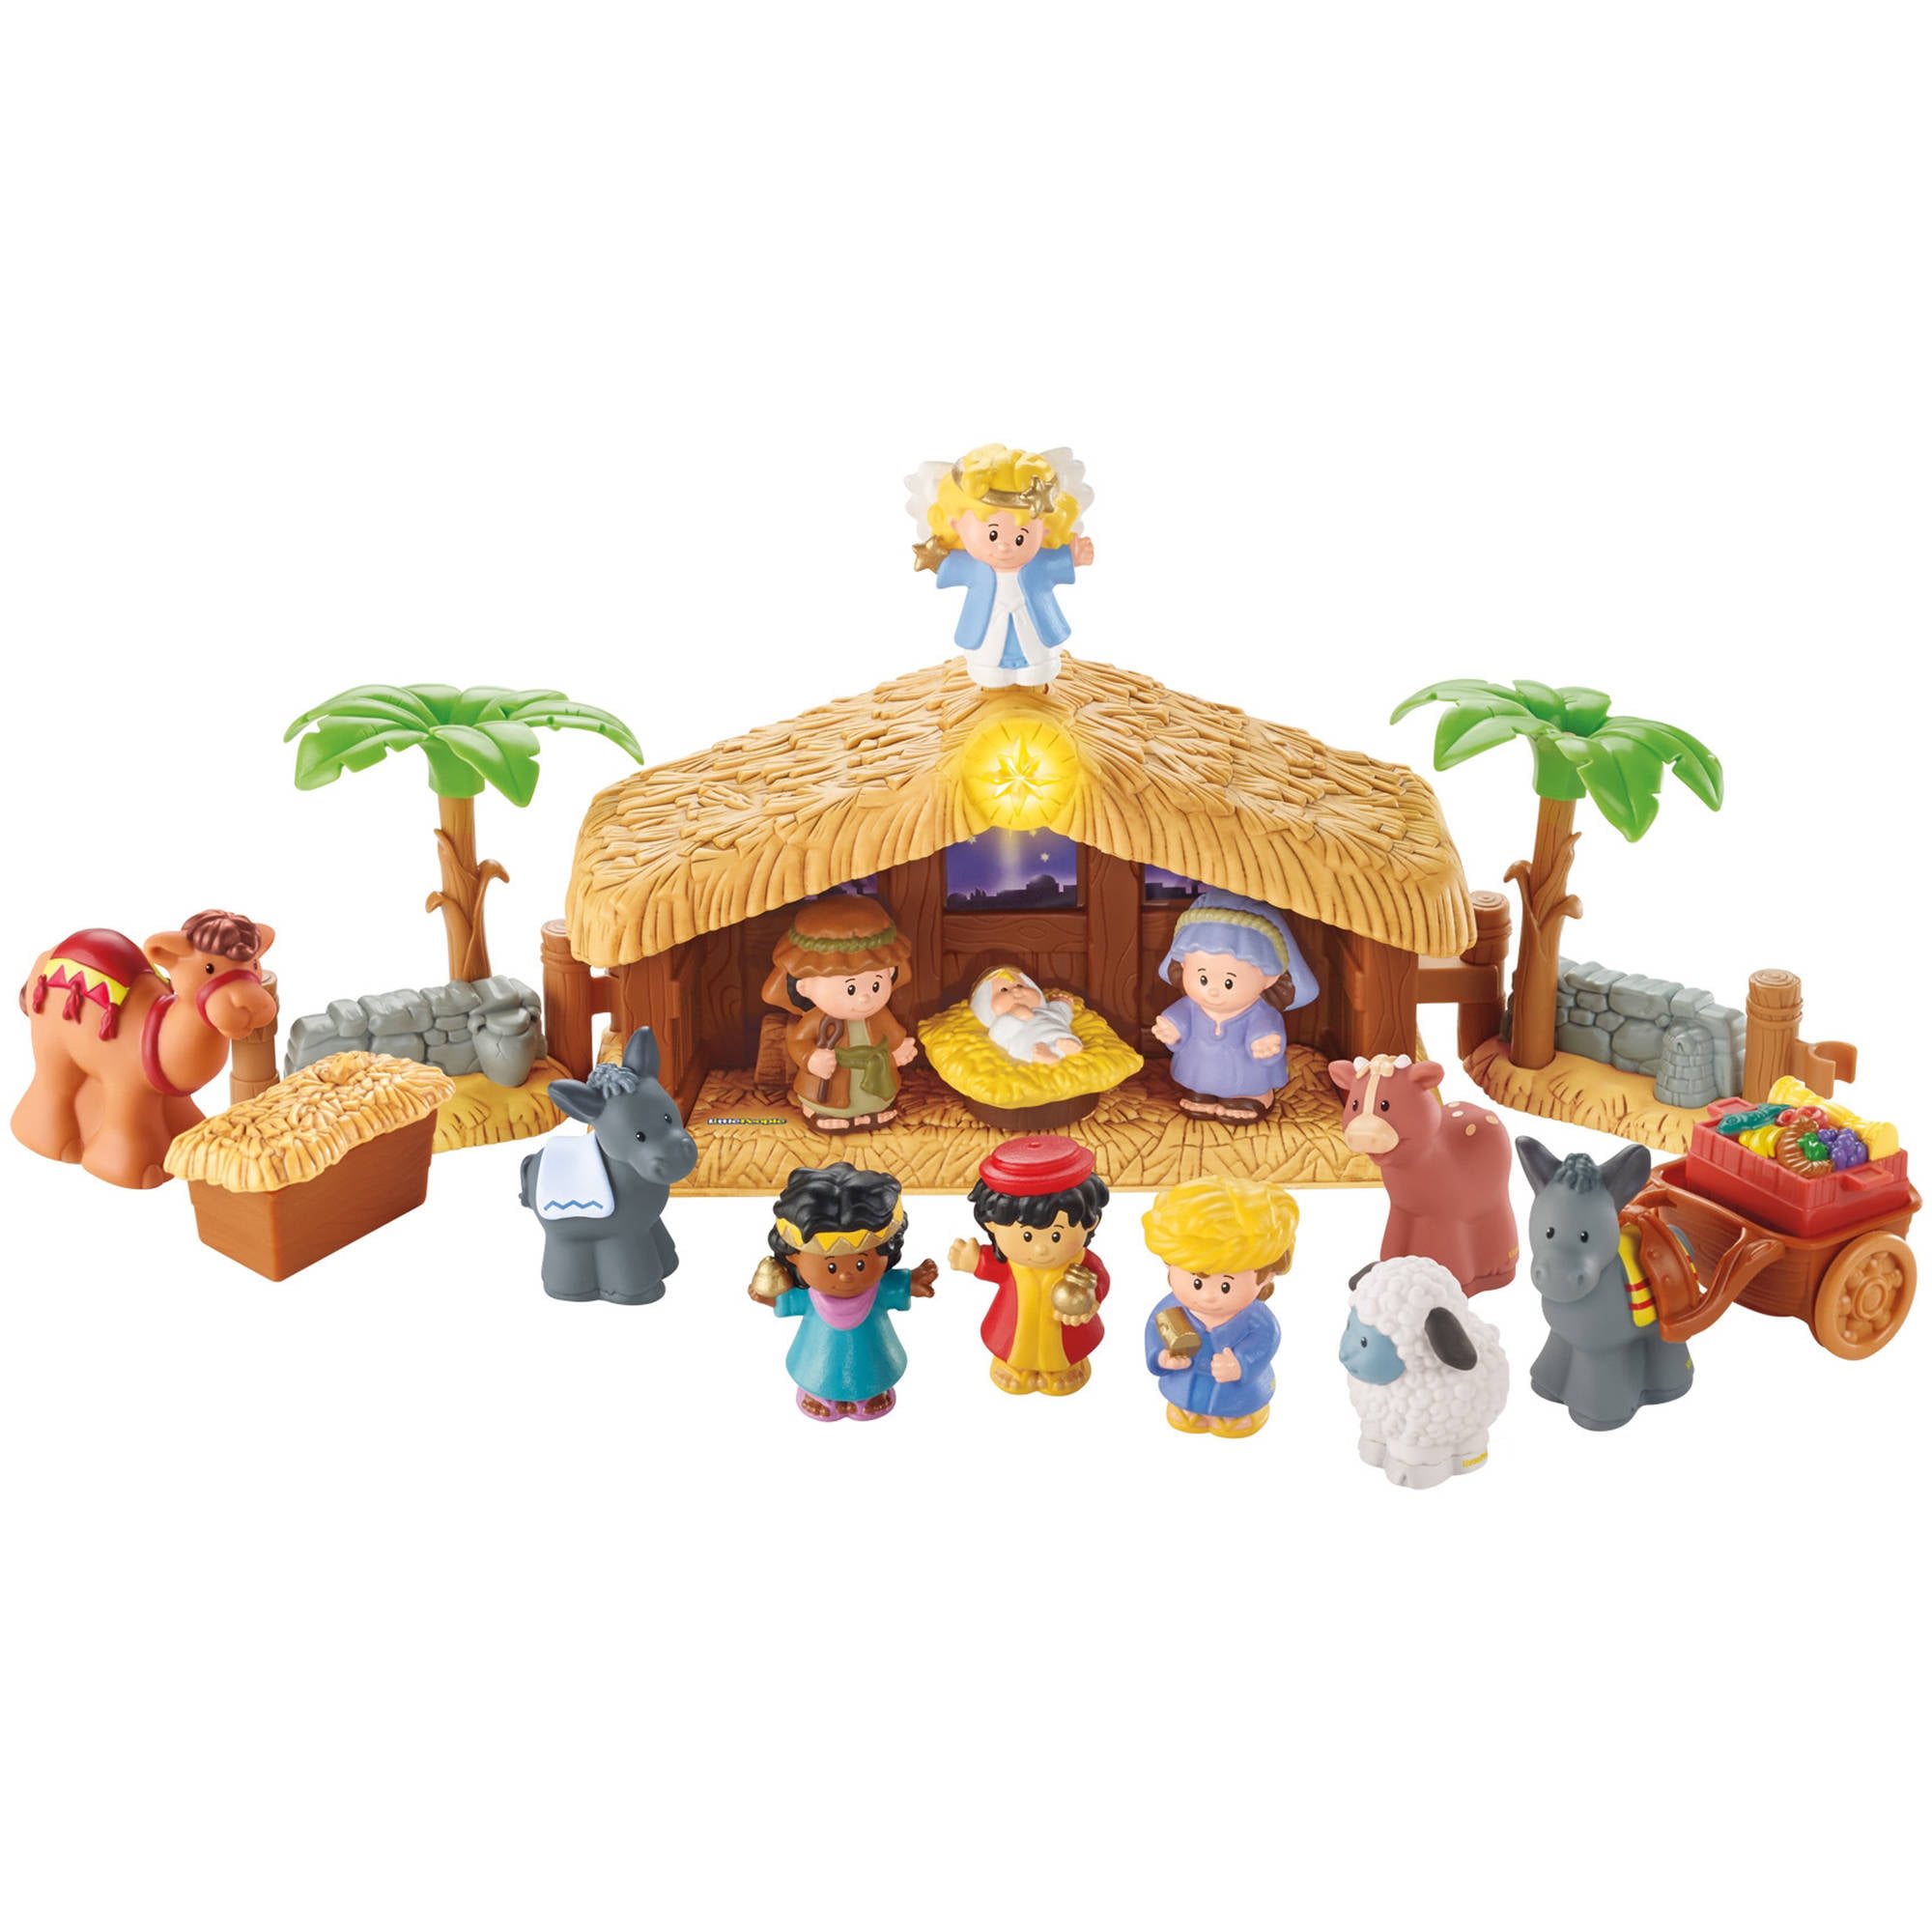 Details about   FISHER PRICE LITTLE PEOPLE CHRISTMAS NATIVITY STABLE MANGER DONKEY W BLANKET 